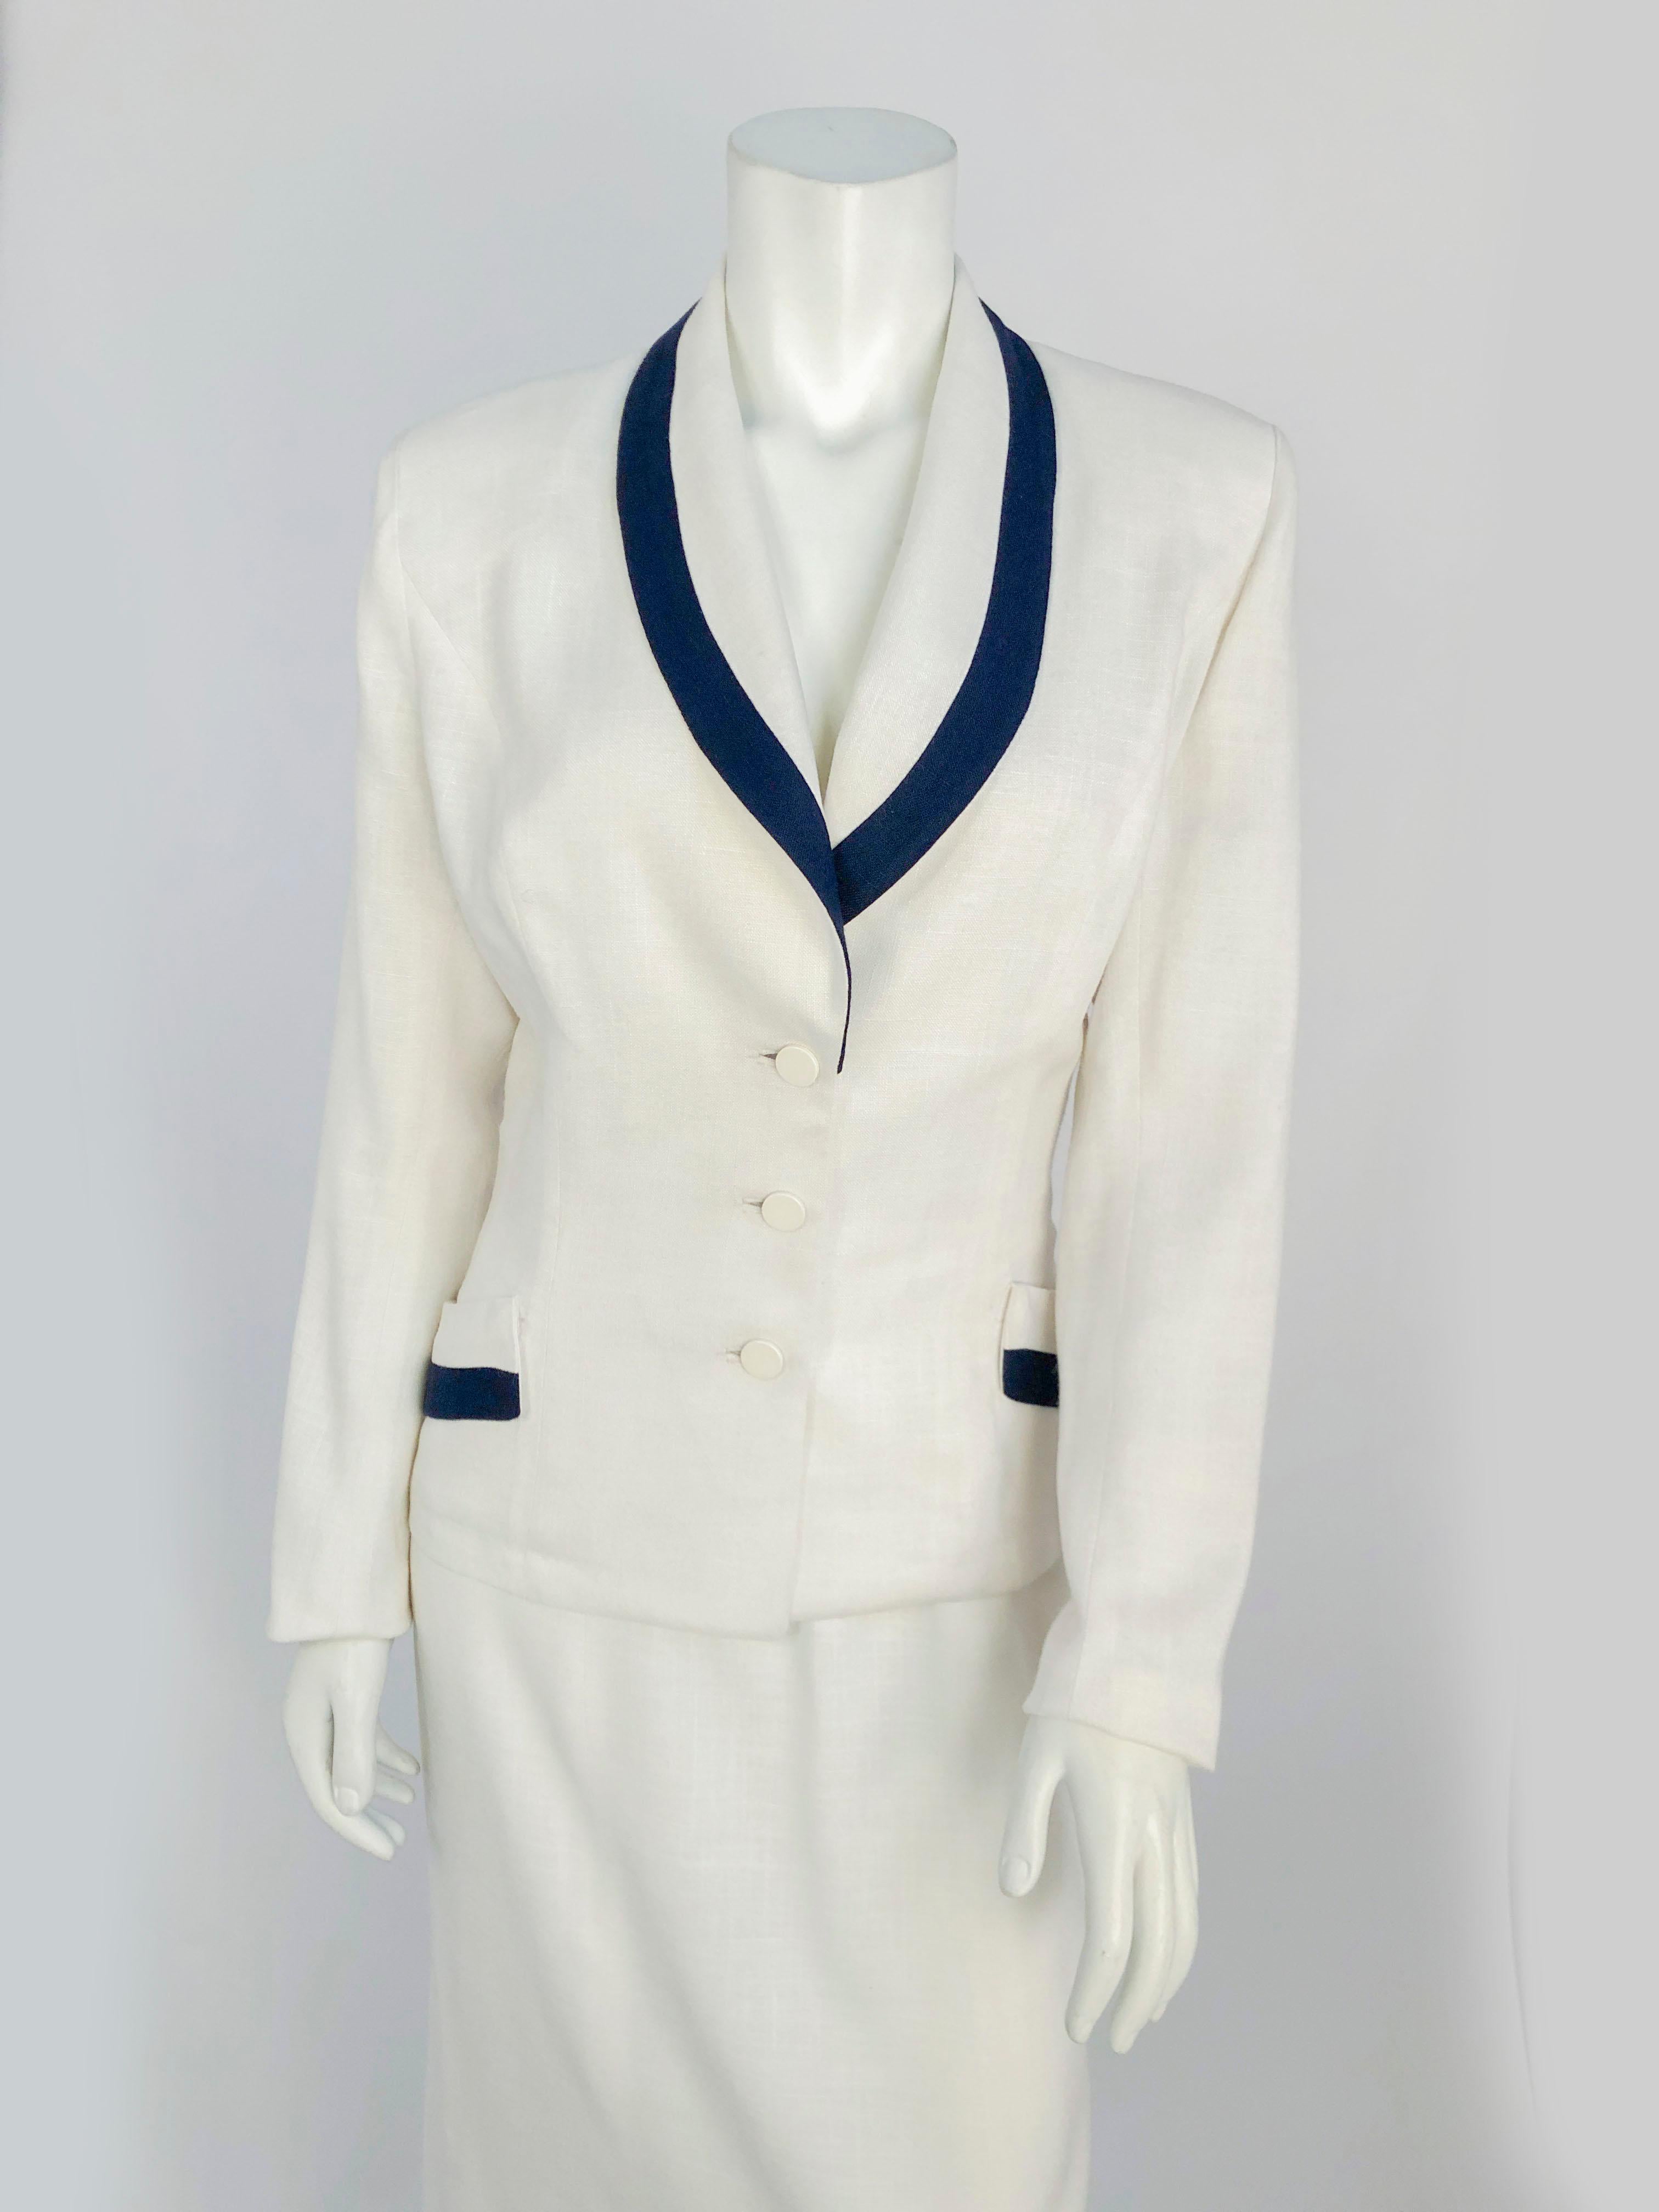 1950s White linen suit with navy boarder along the shawl collar and pockets. The jacket with fitted with inset buttons and two functional pockets. The skirt has a straight silhouette and an applied waist band.